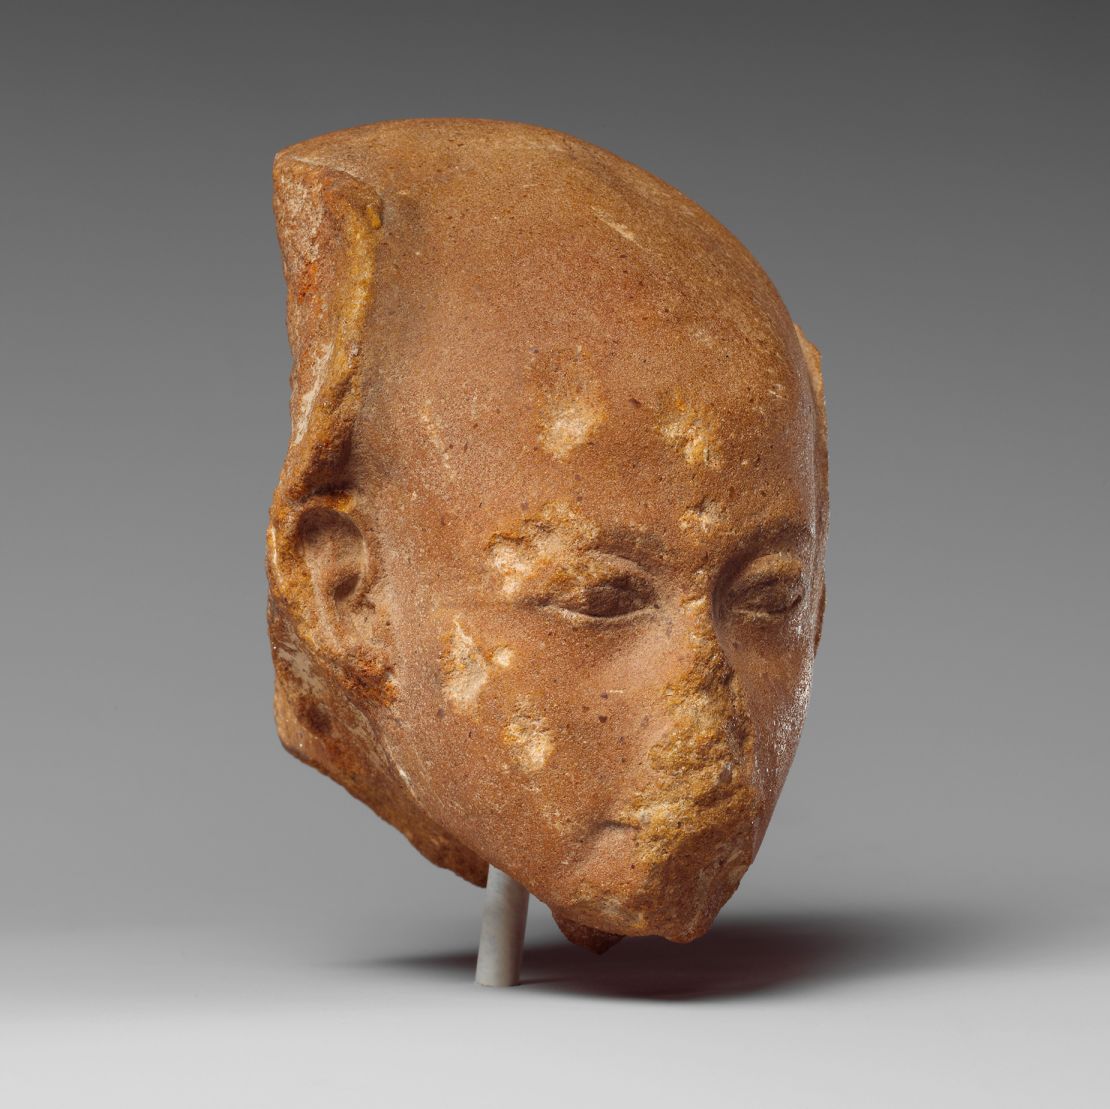 The head of an Ancient Egyptian princess from a group statue dating from the Amarna Period circa. 1352 to 1336 B.C.